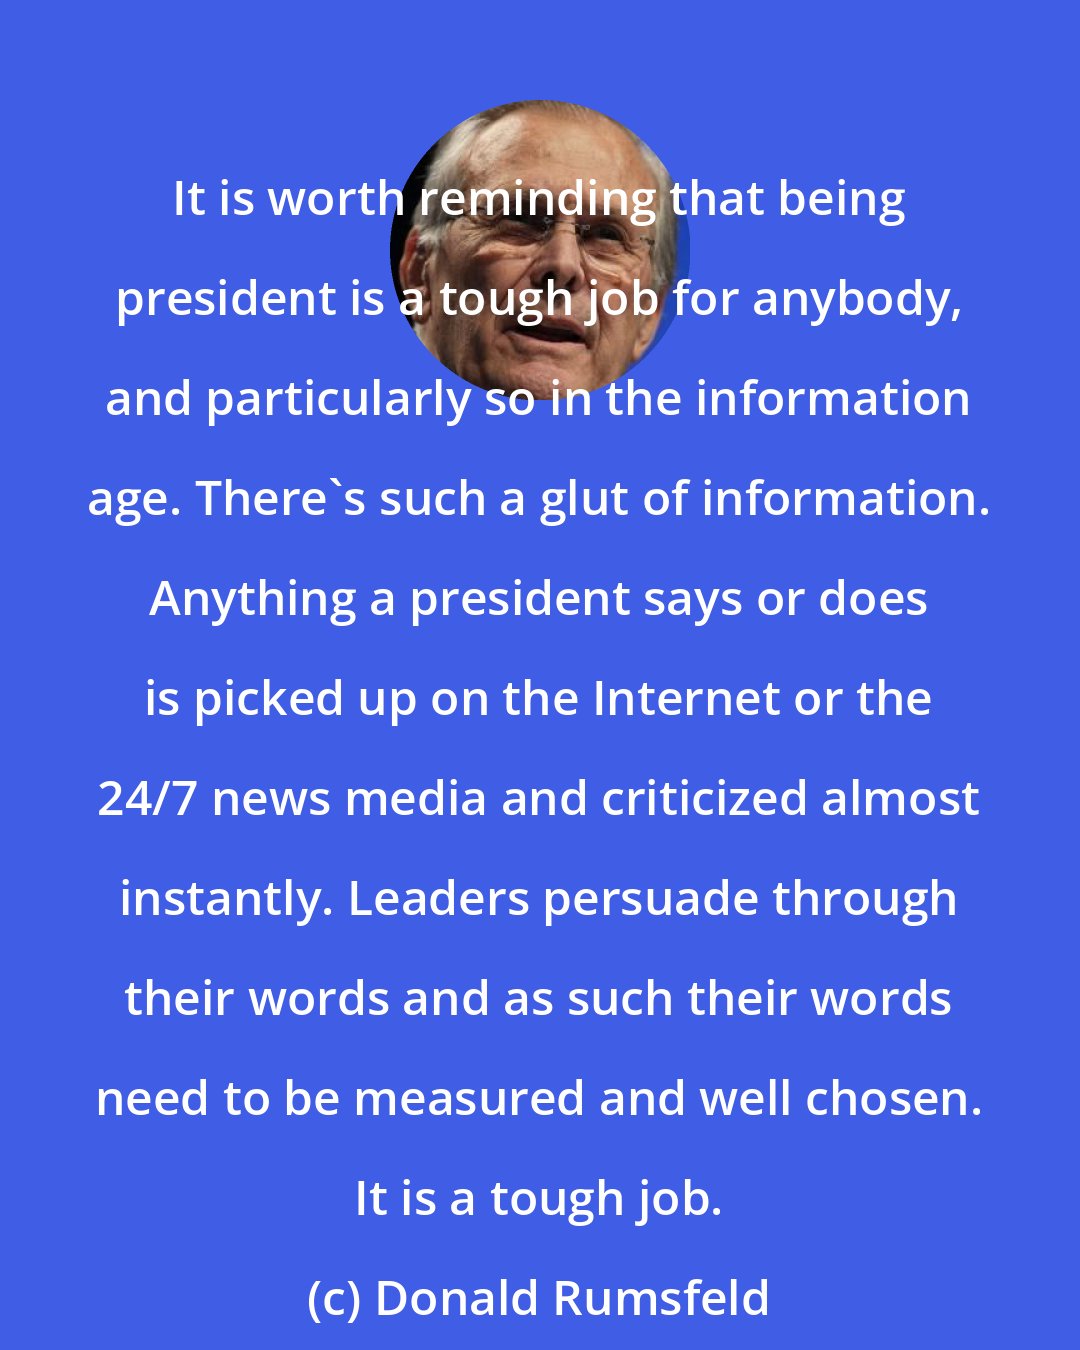 Donald Rumsfeld: It is worth reminding that being president is a tough job for anybody, and particularly so in the information age. There's such a glut of information. Anything a president says or does is picked up on the Internet or the 24/7 news media and criticized almost instantly. Leaders persuade through their words and as such their words need to be measured and well chosen. It is a tough job.